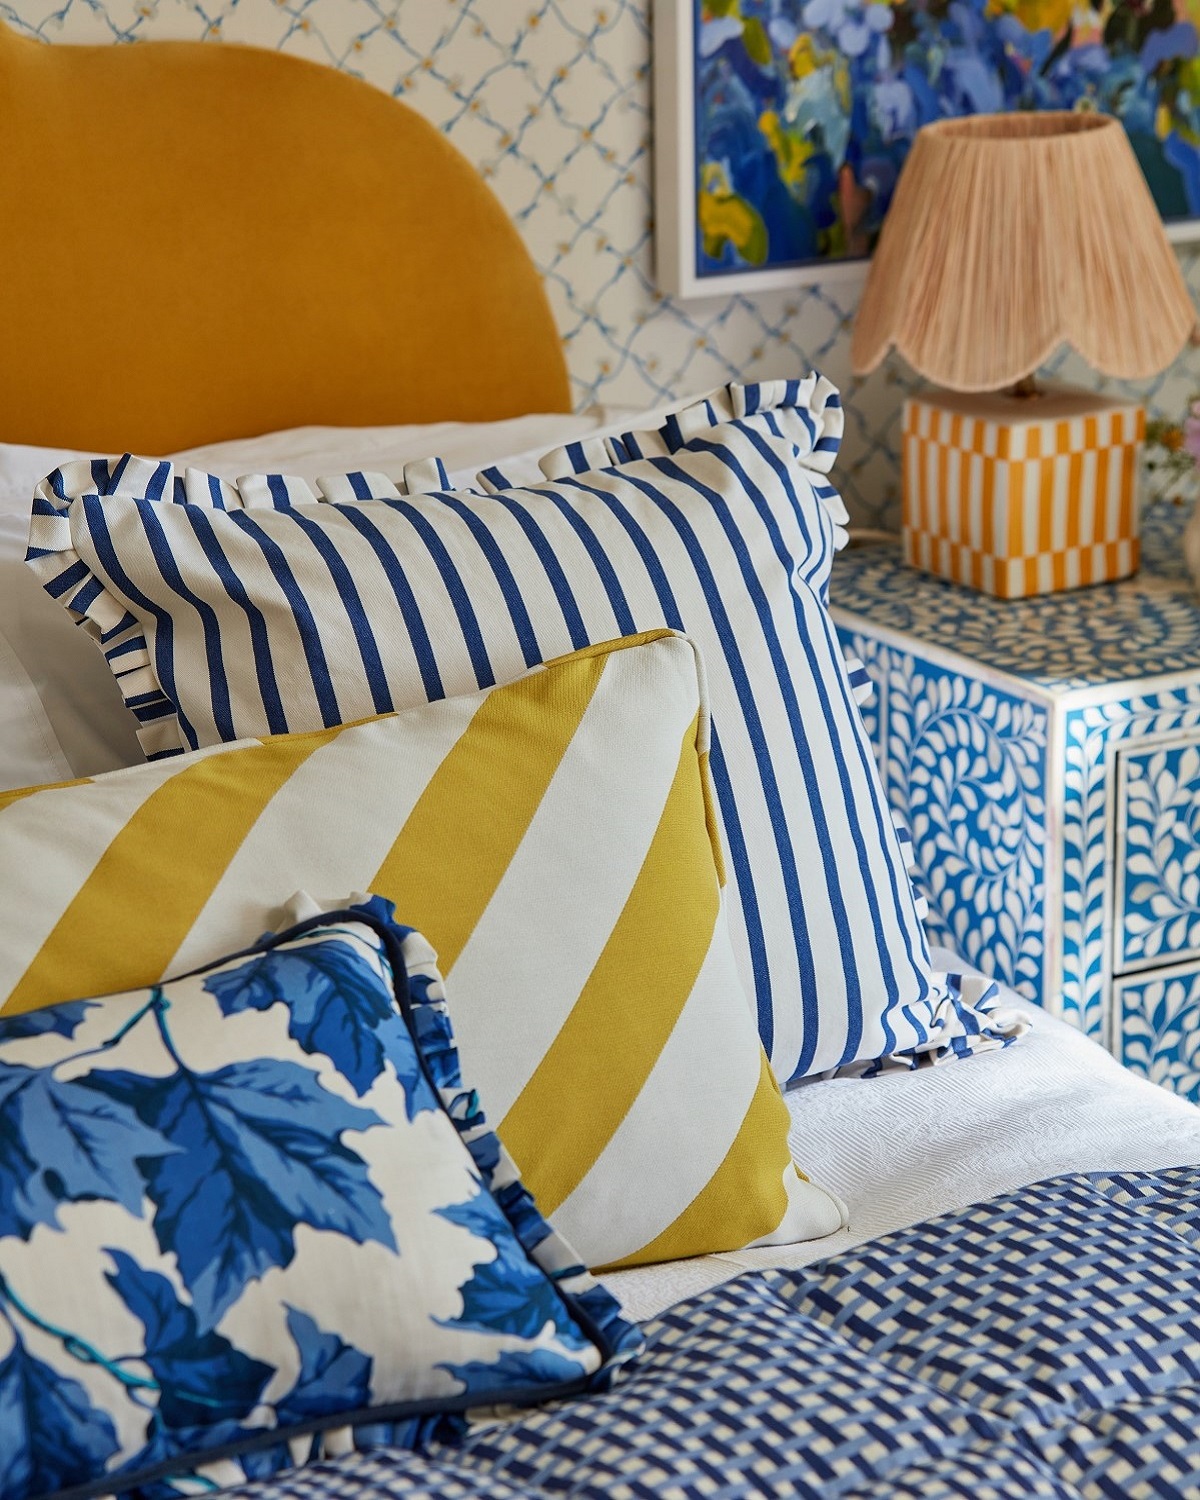 detail of a bed with yellow upholstered headboard and an eclectic mix of fabric cushions in yellow and blue stripes and patterns from Harlequin